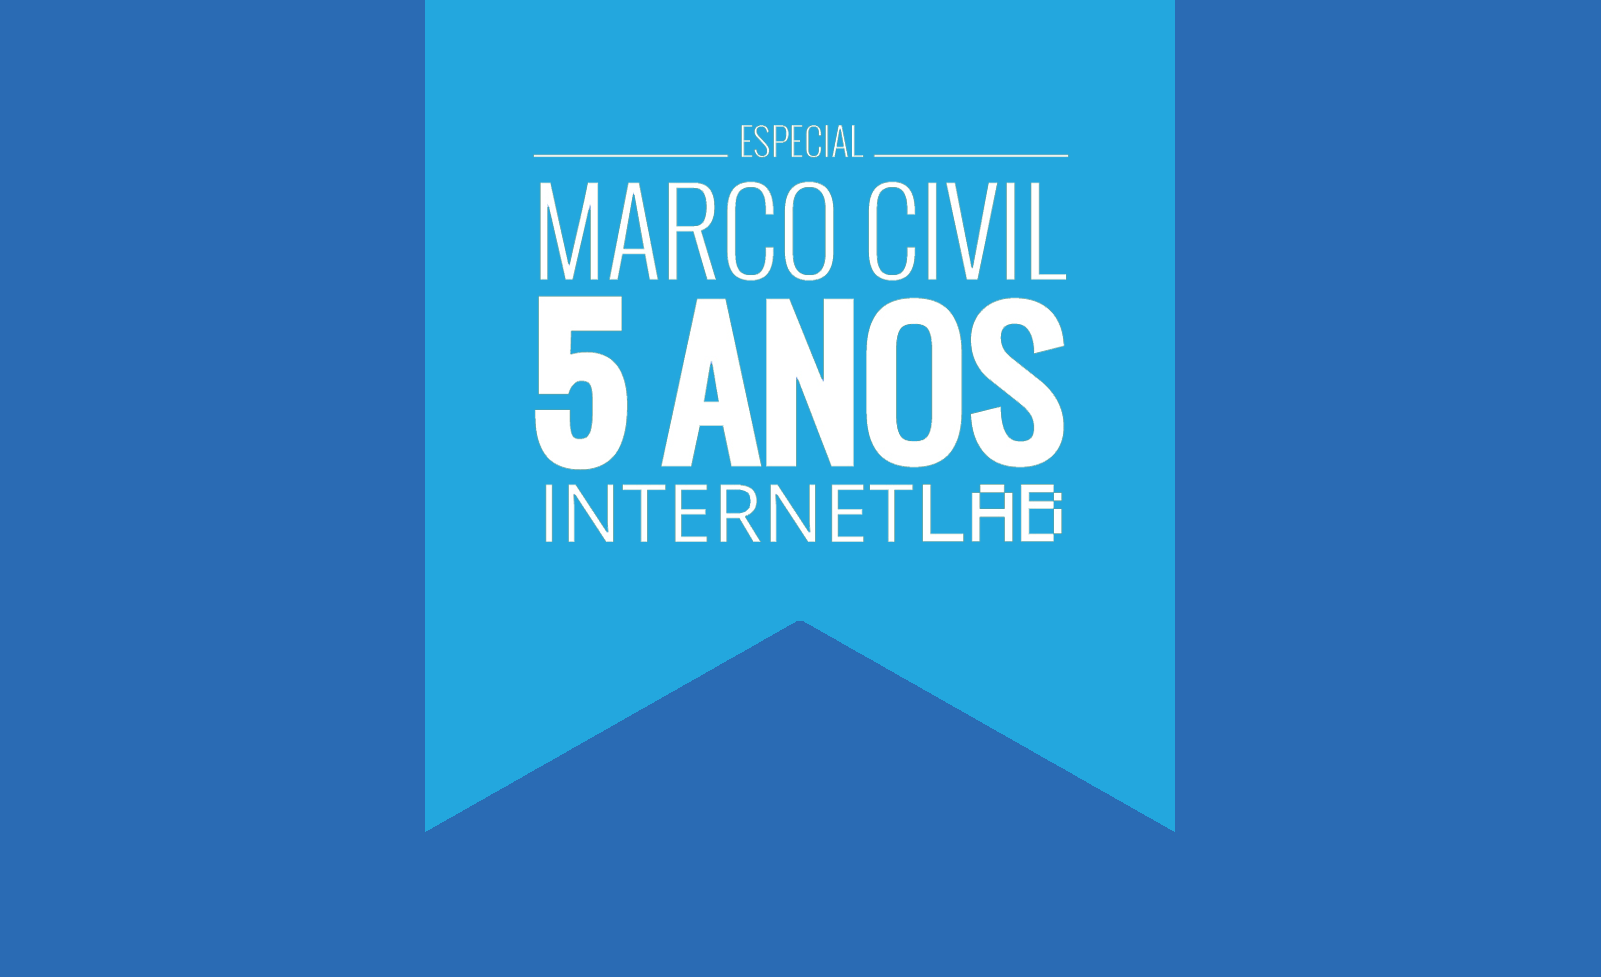 Illustrative image of the project with a dark blue background and a light blue frame in the center in the form of a flag with the text: Especial Marco Civil 5 anos InternetLab.